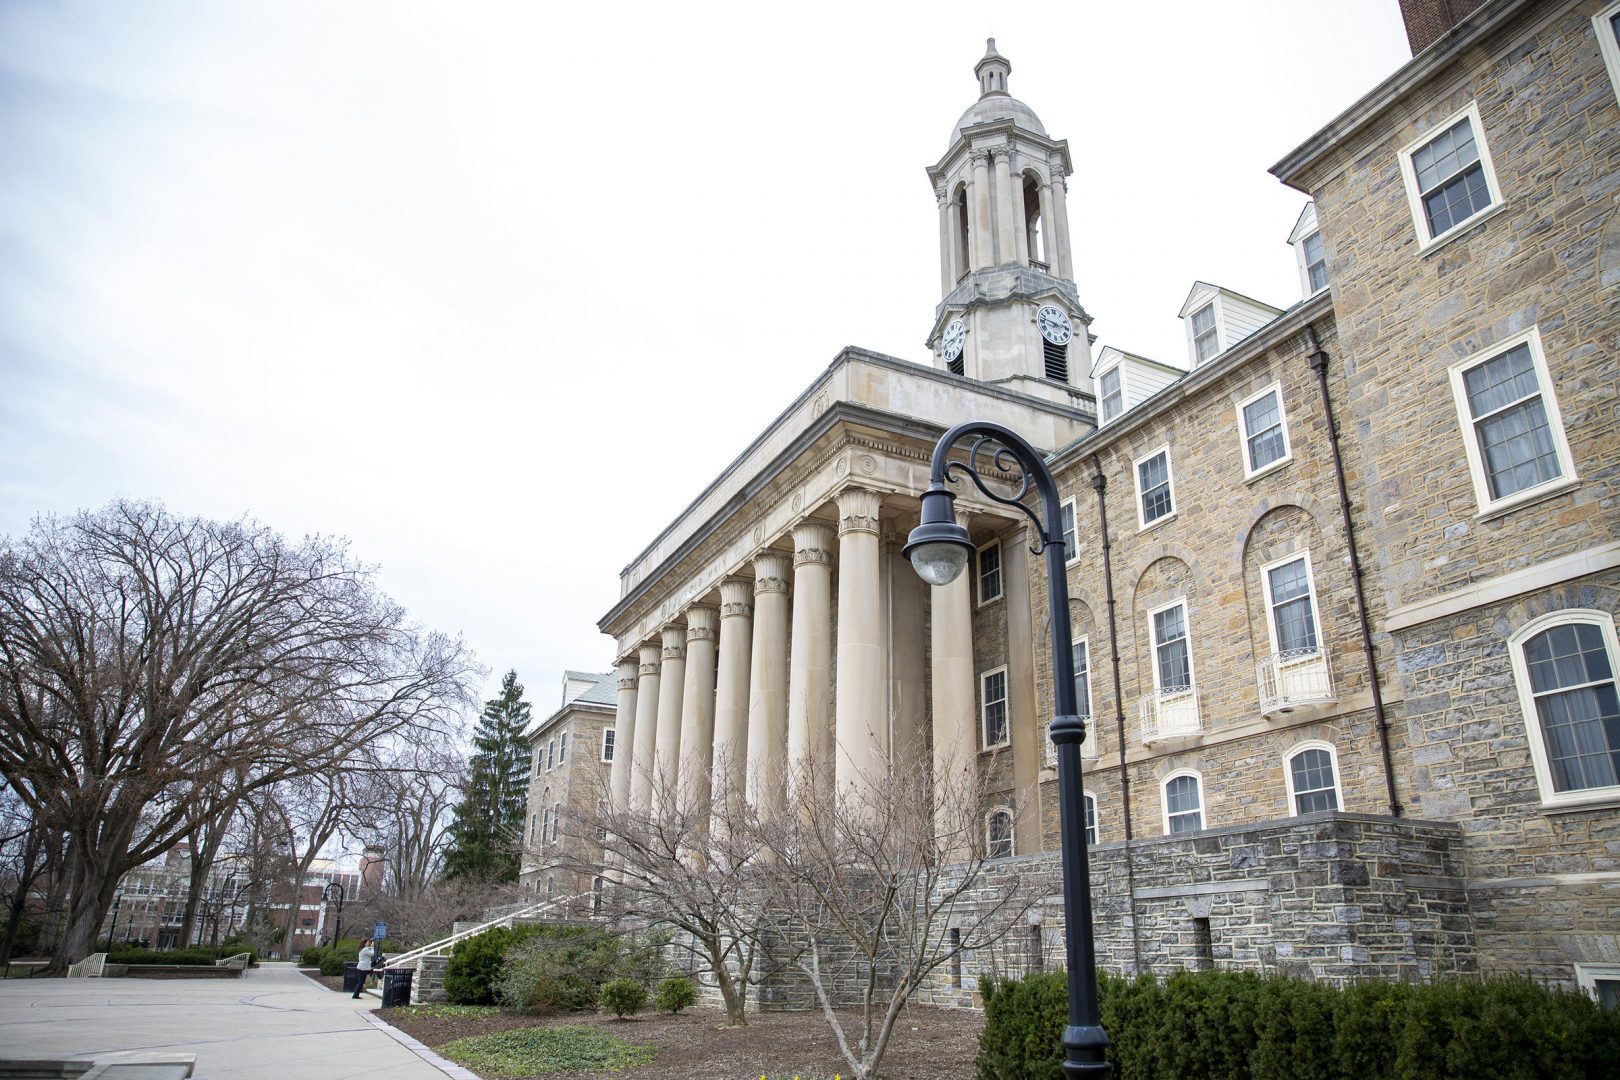 More than 1,000 faculty and other employees raise concerns about Penn State’s fall reopening